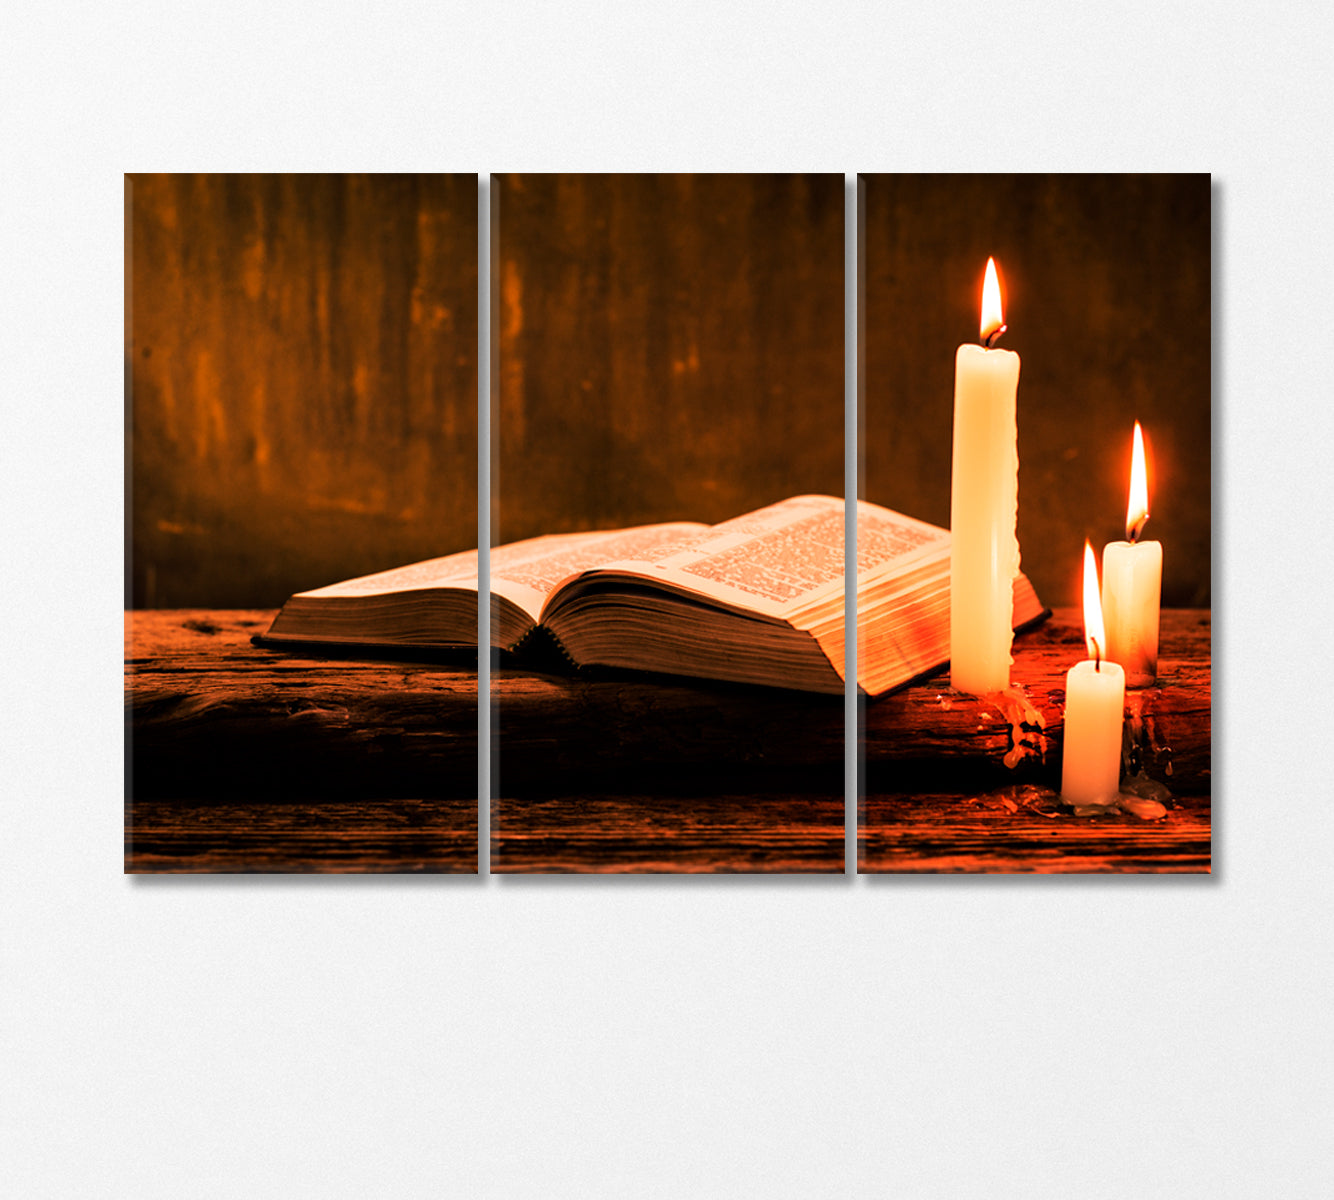 Bible with Candles Canvas Print-CetArt-3 Panels-36x24 inches-CetArt